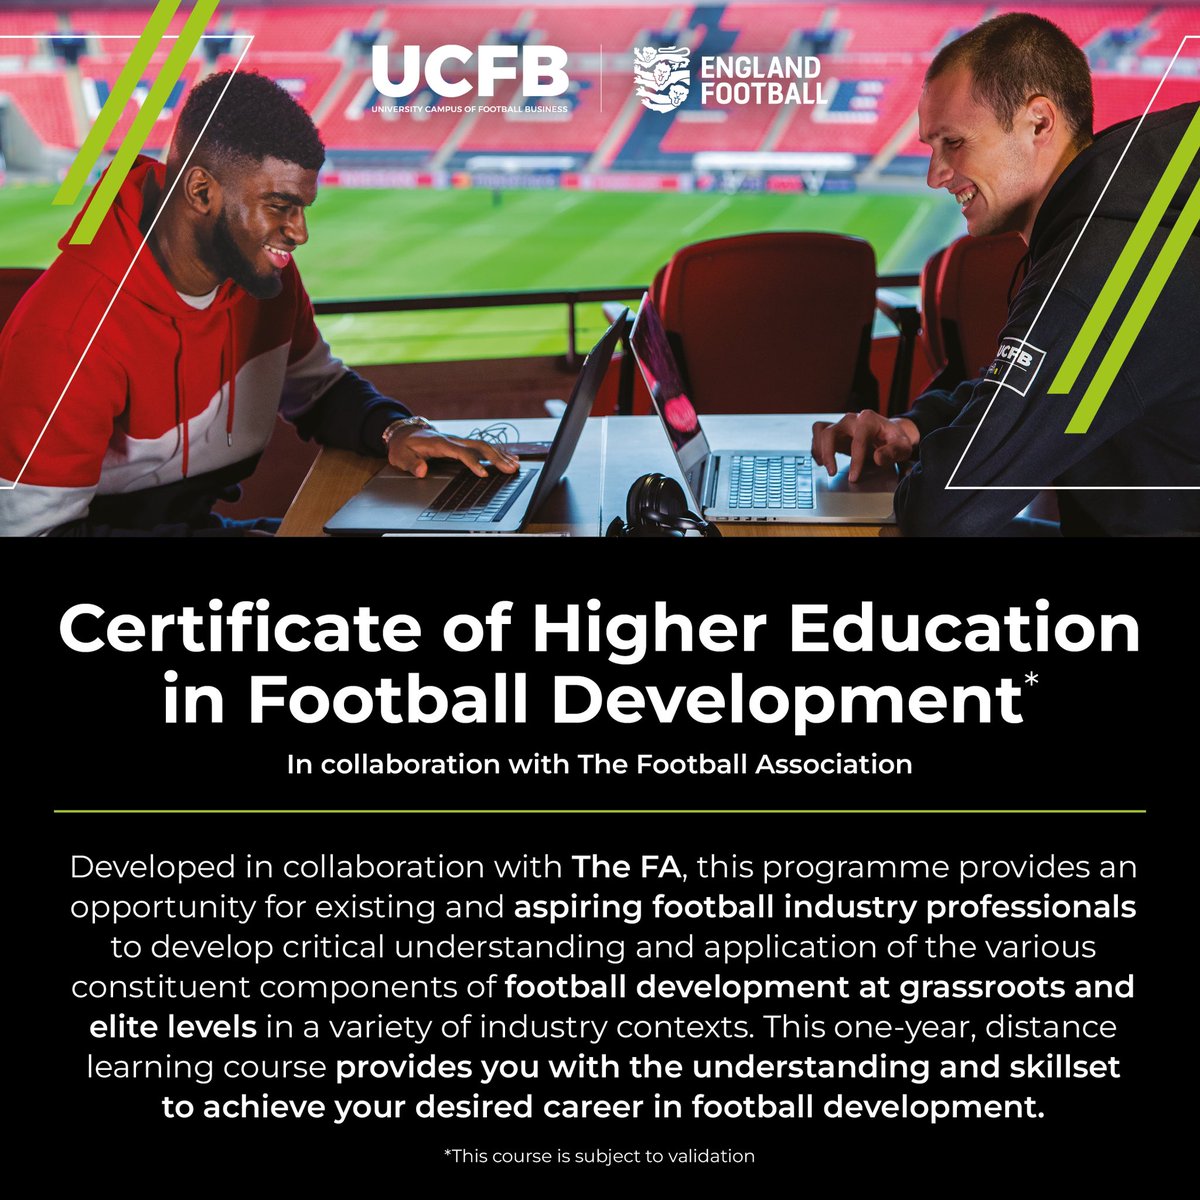 📚 SPONSOR POST | @UCFB has launched a new Certificate of Higher Education in collaboration with @Englandfootball and the @FA to support career opportunities within football development 🎓 The course includes one year of distance learning, with 150 hours of industry experience…